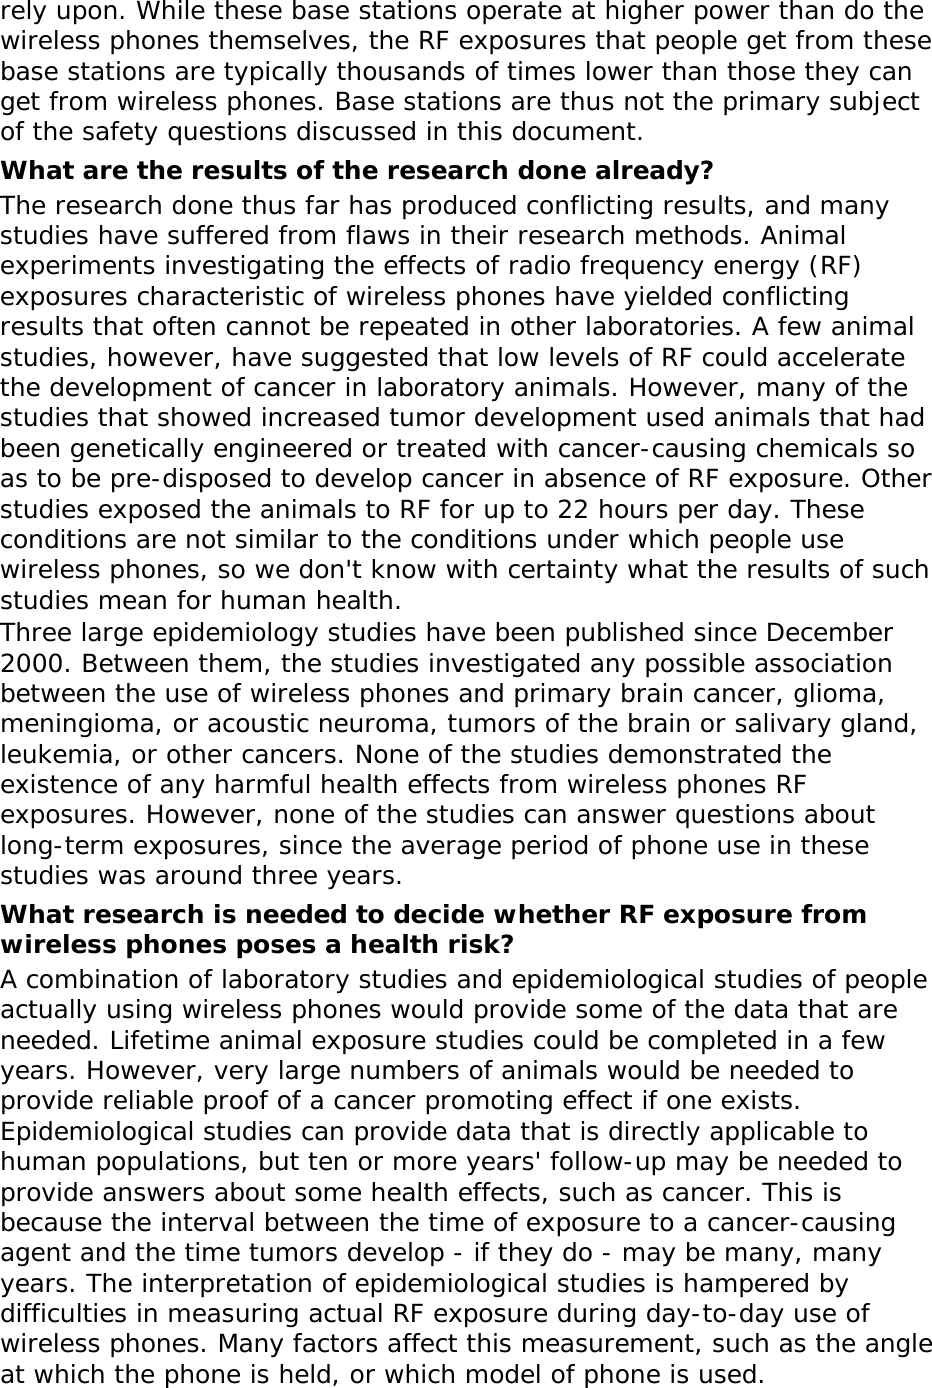 rely upon. While these base stations operate at higher power than do the wireless phones themselves, the RF exposures that people get from these base stations are typically thousands of times lower than those they can get from wireless phones. Base stations are thus not the primary subject of the safety questions discussed in this document. What are the results of the research done already? The research done thus far has produced conflicting results, and many studies have suffered from flaws in their research methods. Animal experiments investigating the effects of radio frequency energy (RF) exposures characteristic of wireless phones have yielded conflicting results that often cannot be repeated in other laboratories. A few animal studies, however, have suggested that low levels of RF could accelerate the development of cancer in laboratory animals. However, many of the studies that showed increased tumor development used animals that had been genetically engineered or treated with cancer-causing chemicals so as to be pre-disposed to develop cancer in absence of RF exposure. Other studies exposed the animals to RF for up to 22 hours per day. These conditions are not similar to the conditions under which people use wireless phones, so we don&apos;t know with certainty what the results of such studies mean for human health. Three large epidemiology studies have been published since December 2000. Between them, the studies investigated any possible association between the use of wireless phones and primary brain cancer, glioma, meningioma, or acoustic neuroma, tumors of the brain or salivary gland, leukemia, or other cancers. None of the studies demonstrated the existence of any harmful health effects from wireless phones RF exposures. However, none of the studies can answer questions about long-term exposures, since the average period of phone use in these studies was around three years. What research is needed to decide whether RF exposure from wireless phones poses a health risk? A combination of laboratory studies and epidemiological studies of people actually using wireless phones would provide some of the data that are needed. Lifetime animal exposure studies could be completed in a few years. However, very large numbers of animals would be needed to provide reliable proof of a cancer promoting effect if one exists. Epidemiological studies can provide data that is directly applicable to human populations, but ten or more years&apos; follow-up may be needed to provide answers about some health effects, such as cancer. This is because the interval between the time of exposure to a cancer-causing agent and the time tumors develop - if they do - may be many, many years. The interpretation of epidemiological studies is hampered by difficulties in measuring actual RF exposure during day-to-day use of wireless phones. Many factors affect this measurement, such as the angle at which the phone is held, or which model of phone is used. 